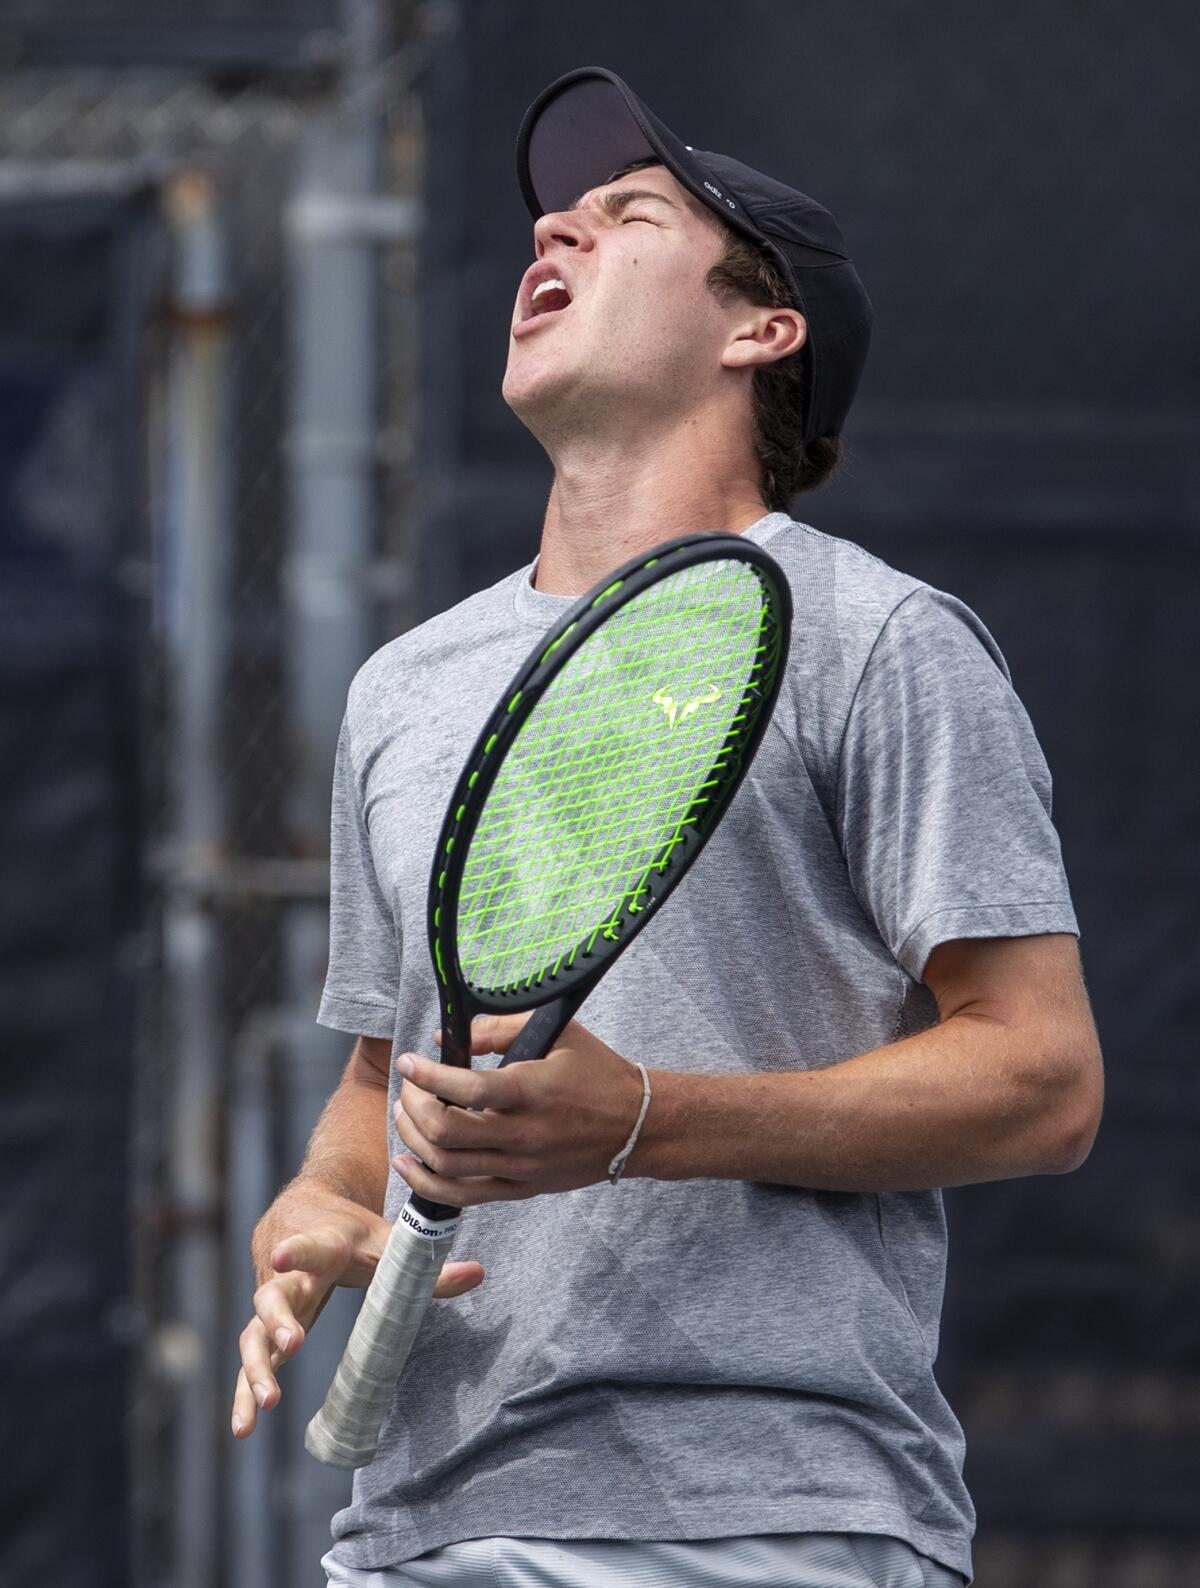 Joseph Emerson of Whittier reacts after losing a point to Daniel Day of Laguna Beach in the boys' 18-and-under round of 64 singles match at the USTA Southern California Junior Sectional Championships in Fountain Valley on Wednesday.